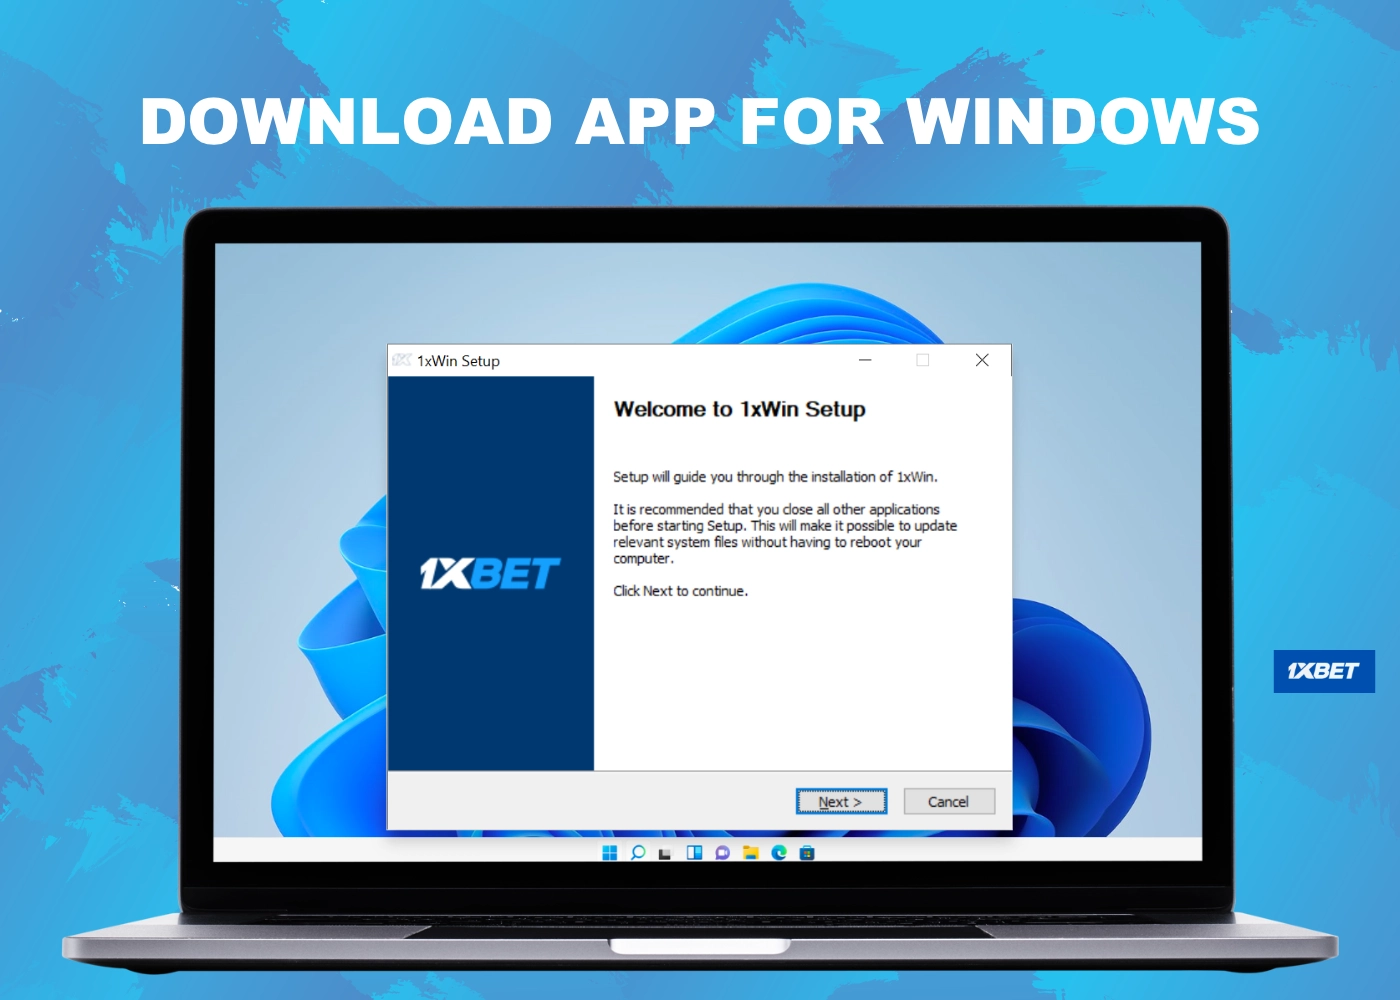 Download 1xBet app for PC Windows from the official website